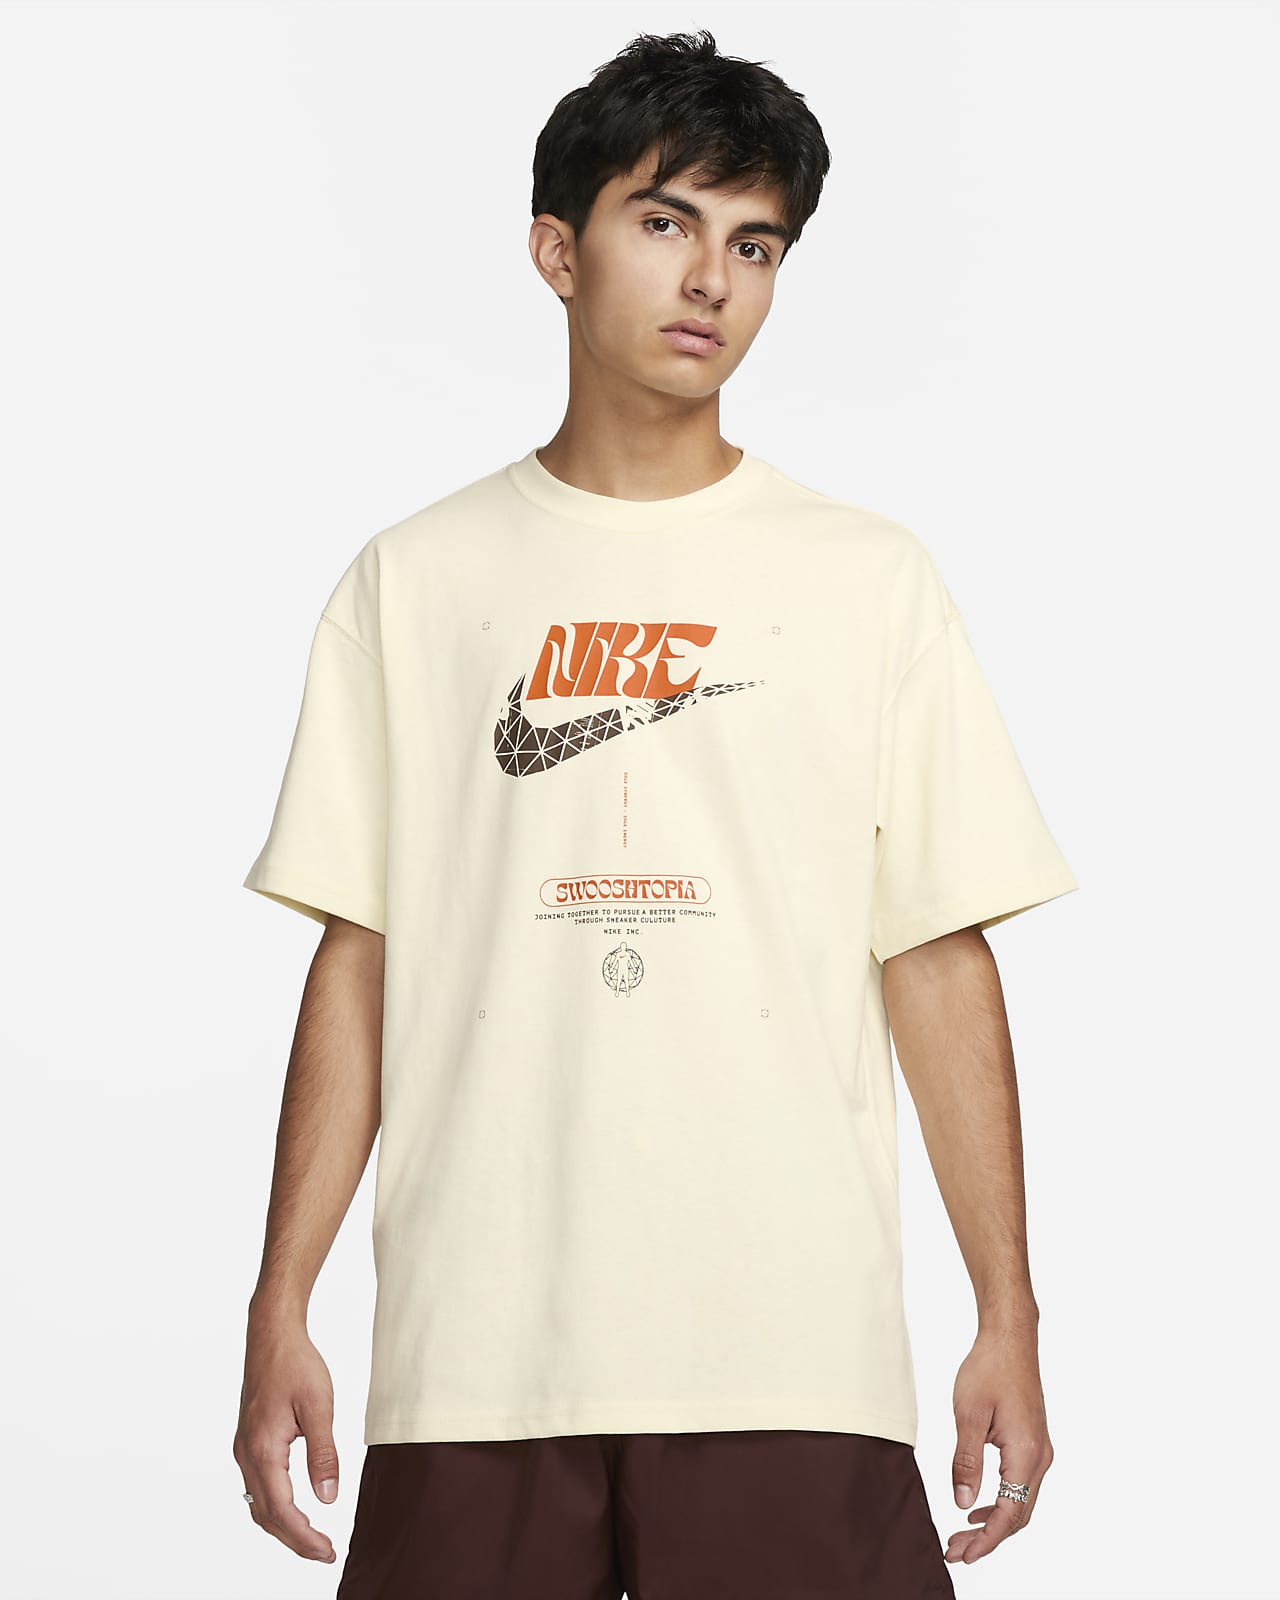 https://static.nike.com/a/images/t_PDP_1280_v1/f_auto,q_auto:eco/2d8e419e-6ae7-4bcf-9a51-1f46b85acac5/t-shirt-sportswear-max90-wFRkck.png